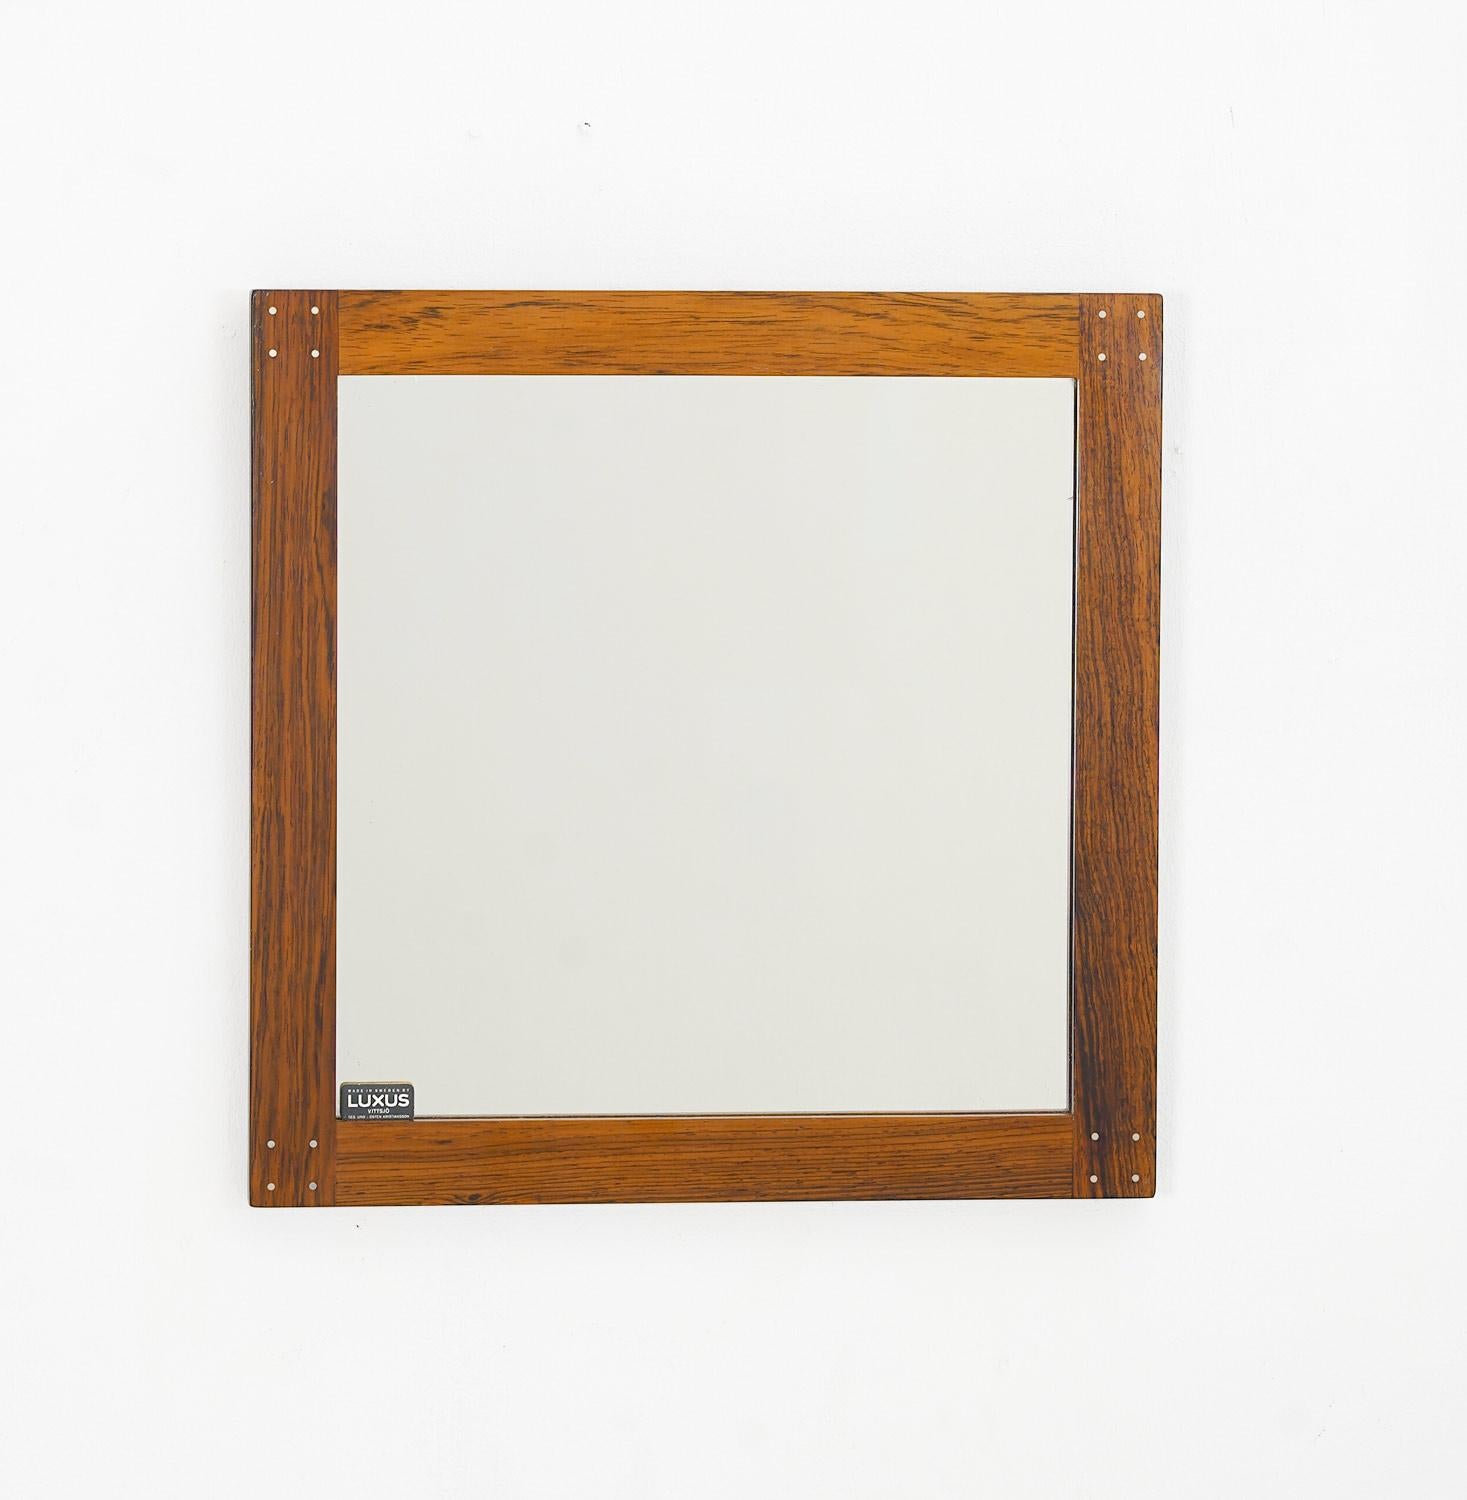 Swedish mirror by Uno & O¨sten Kristiansson for Luxus.
The mirror is made of rosewood with visible metal joinery in each corner.
Condition: very good original condition.